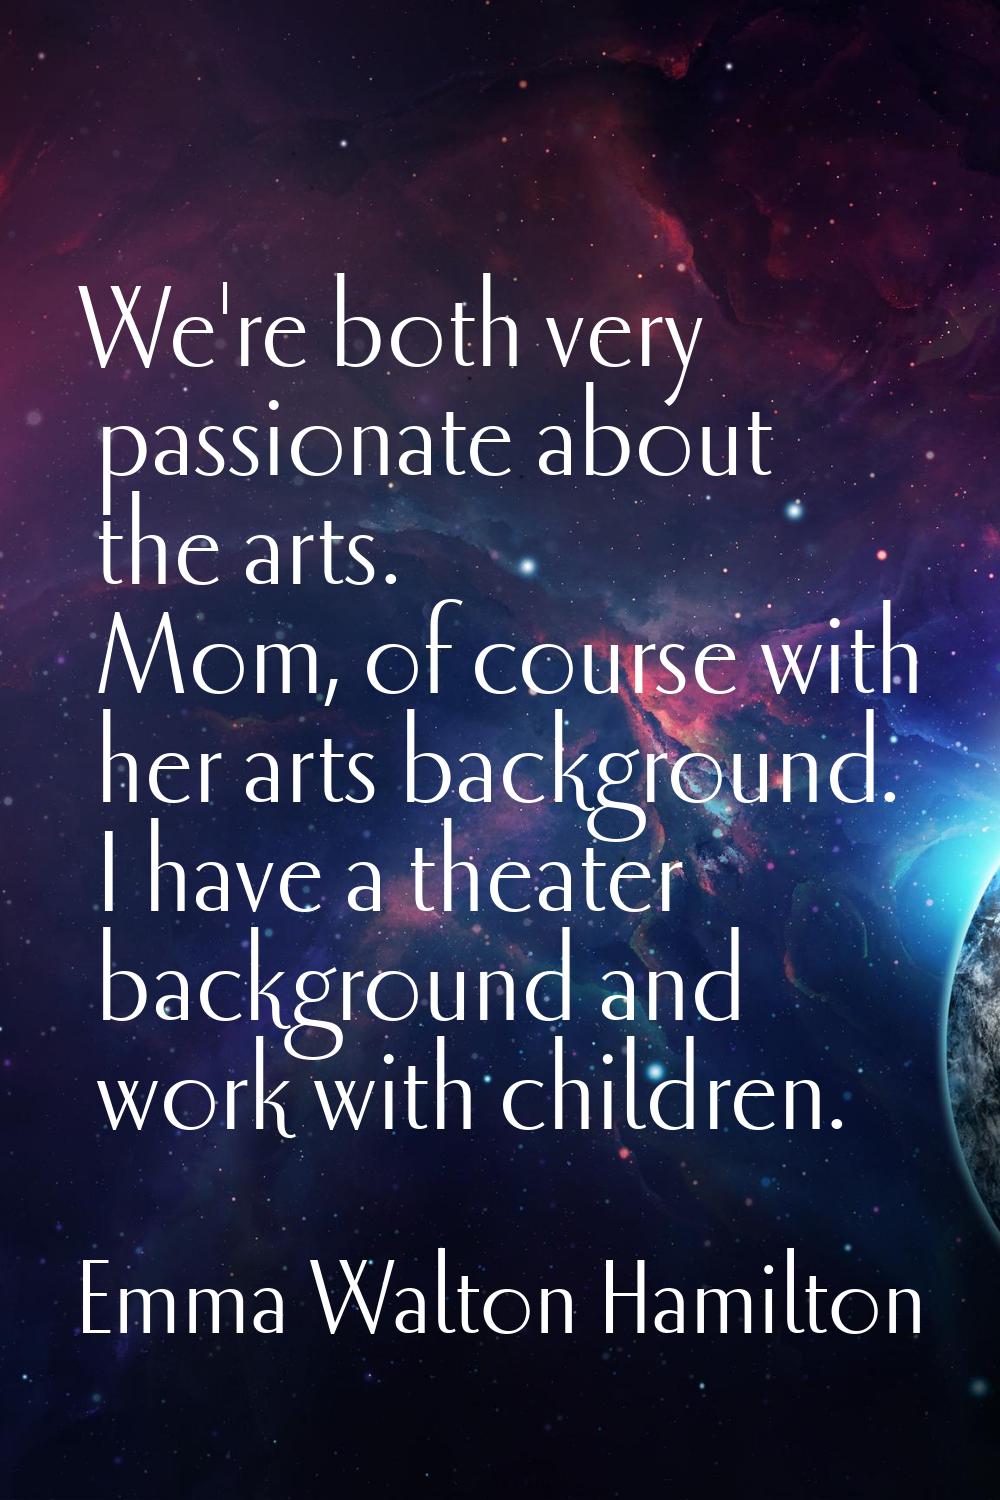 We're both very passionate about the arts. Mom, of course with her arts background. I have a theate